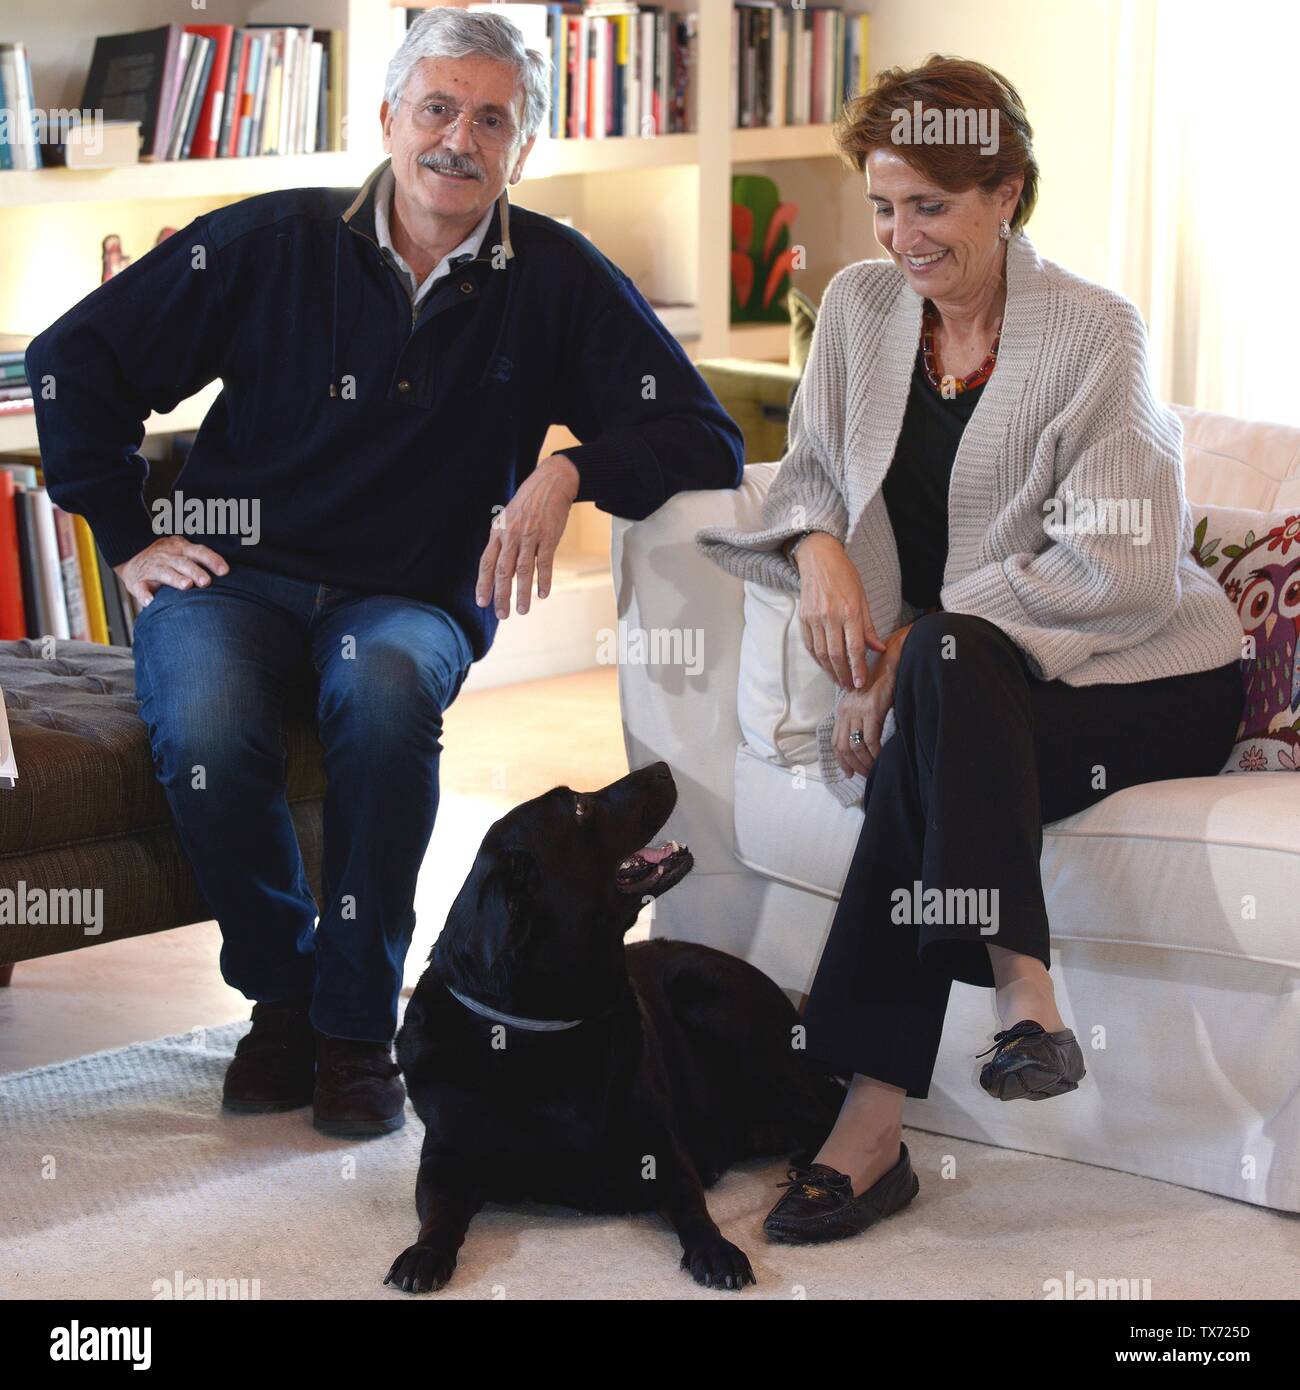 Former italian prime minister and minister of foreing affairs Massimo D'alema and his wife Linda Giuva in the house of their estate 'La Madeleine' whe Stock Photo